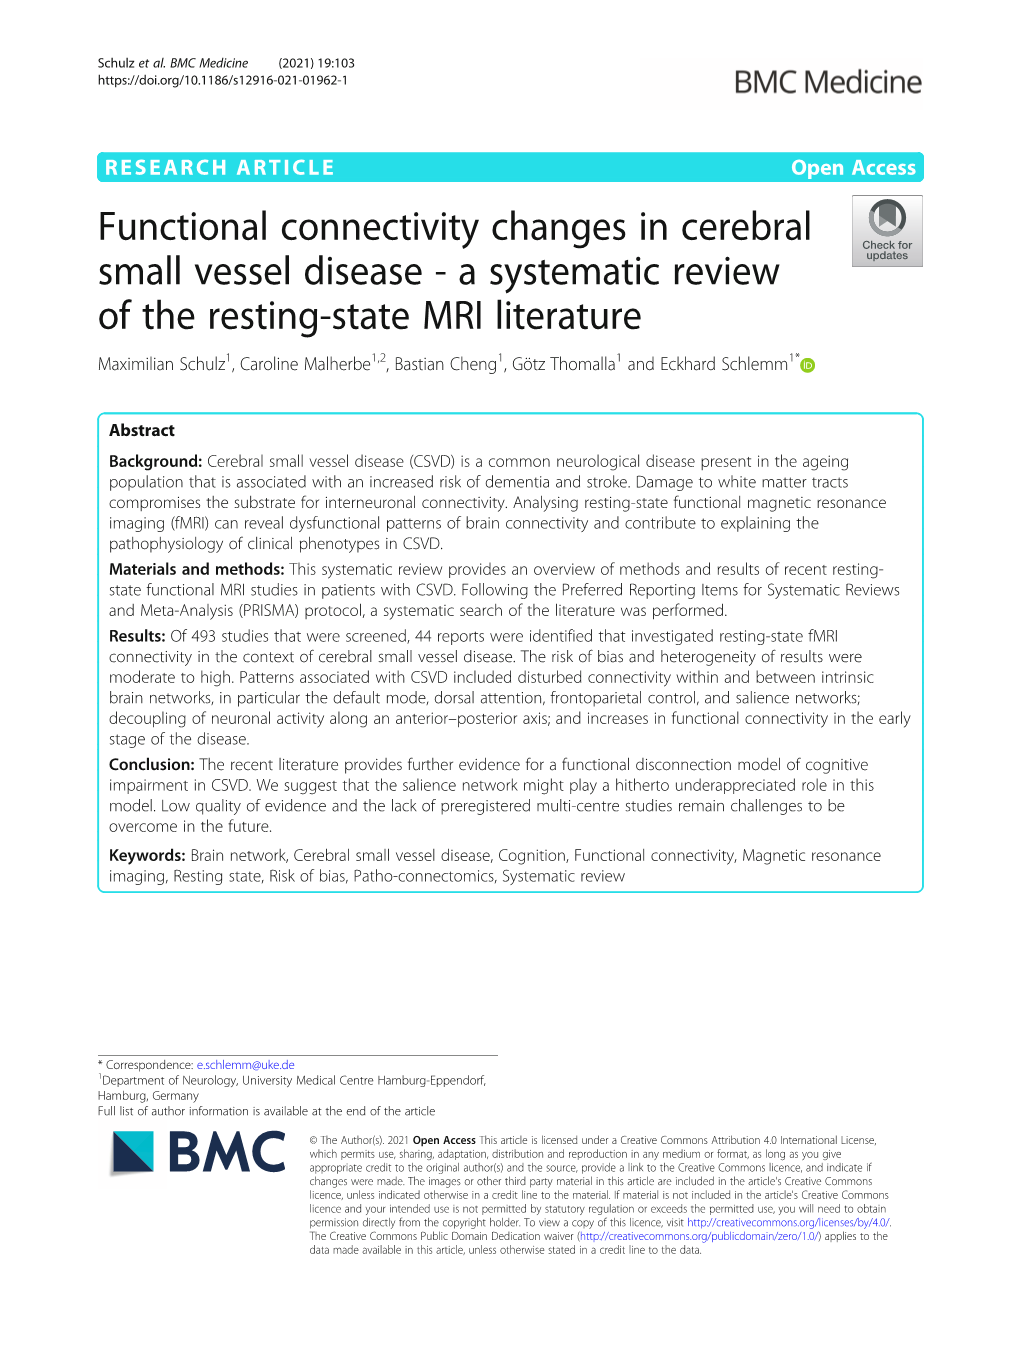 Functional Connectivity Changes in Cerebral Small